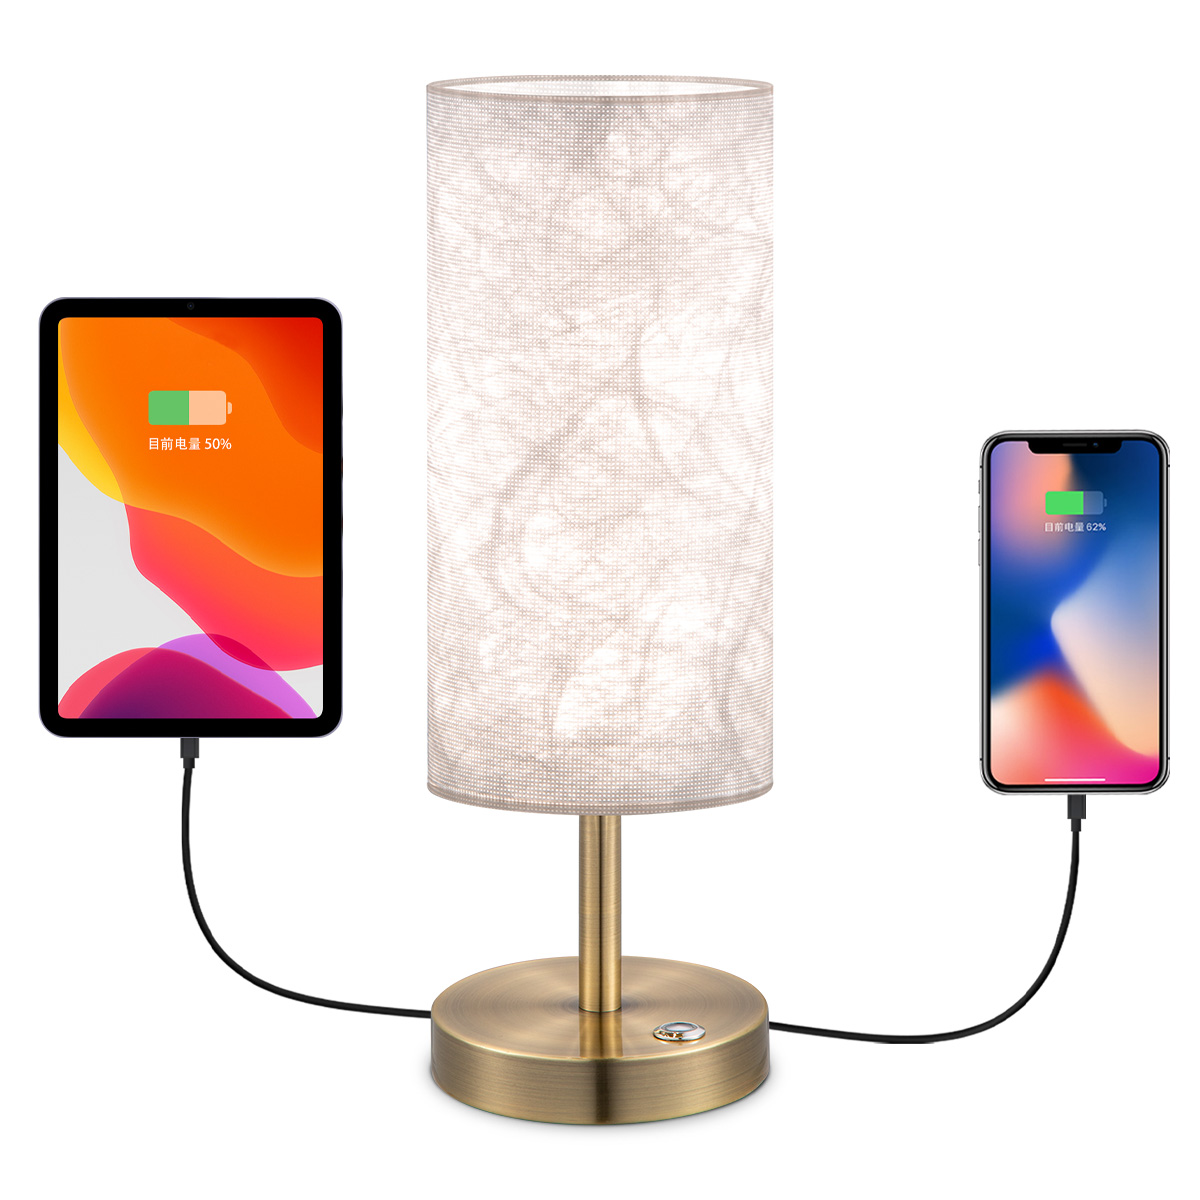 Tangla lighting - TLT7640-01CW - LED table lamp 1 Light - metal and fabric in white and brass - rechargeable - USB type A - E27